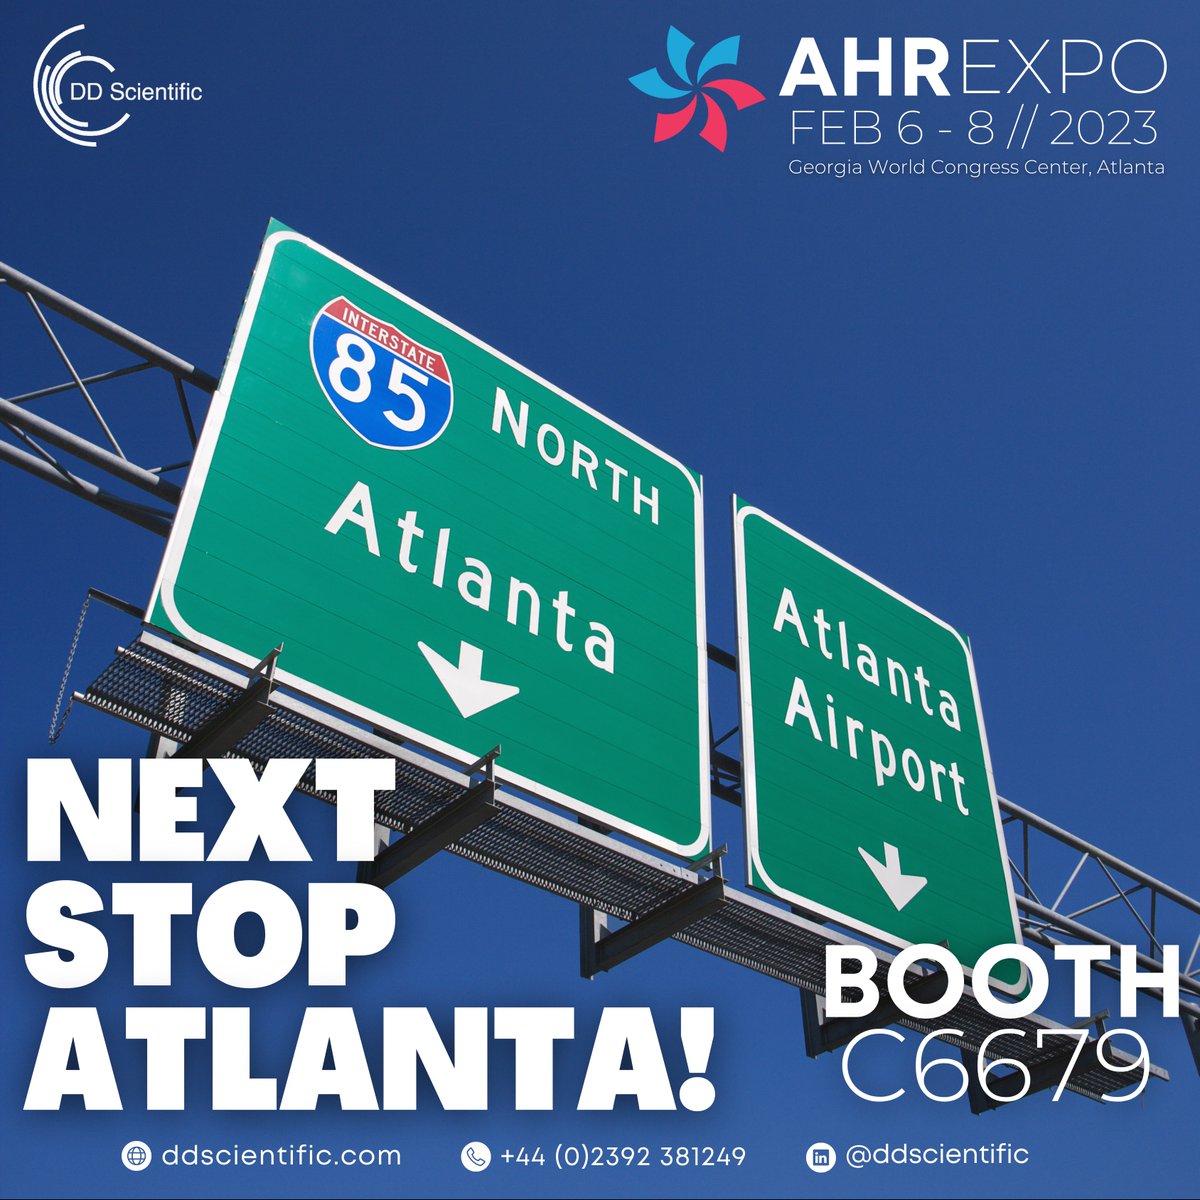 Next stop Atlanta! The team is ready and on their way. We’re looking forward to meeting customers and welcoming new business opportunities.

#atlanta #gassensor #ddscientific #refrigeration #airquality #ventilation #heating #industrial #AHR